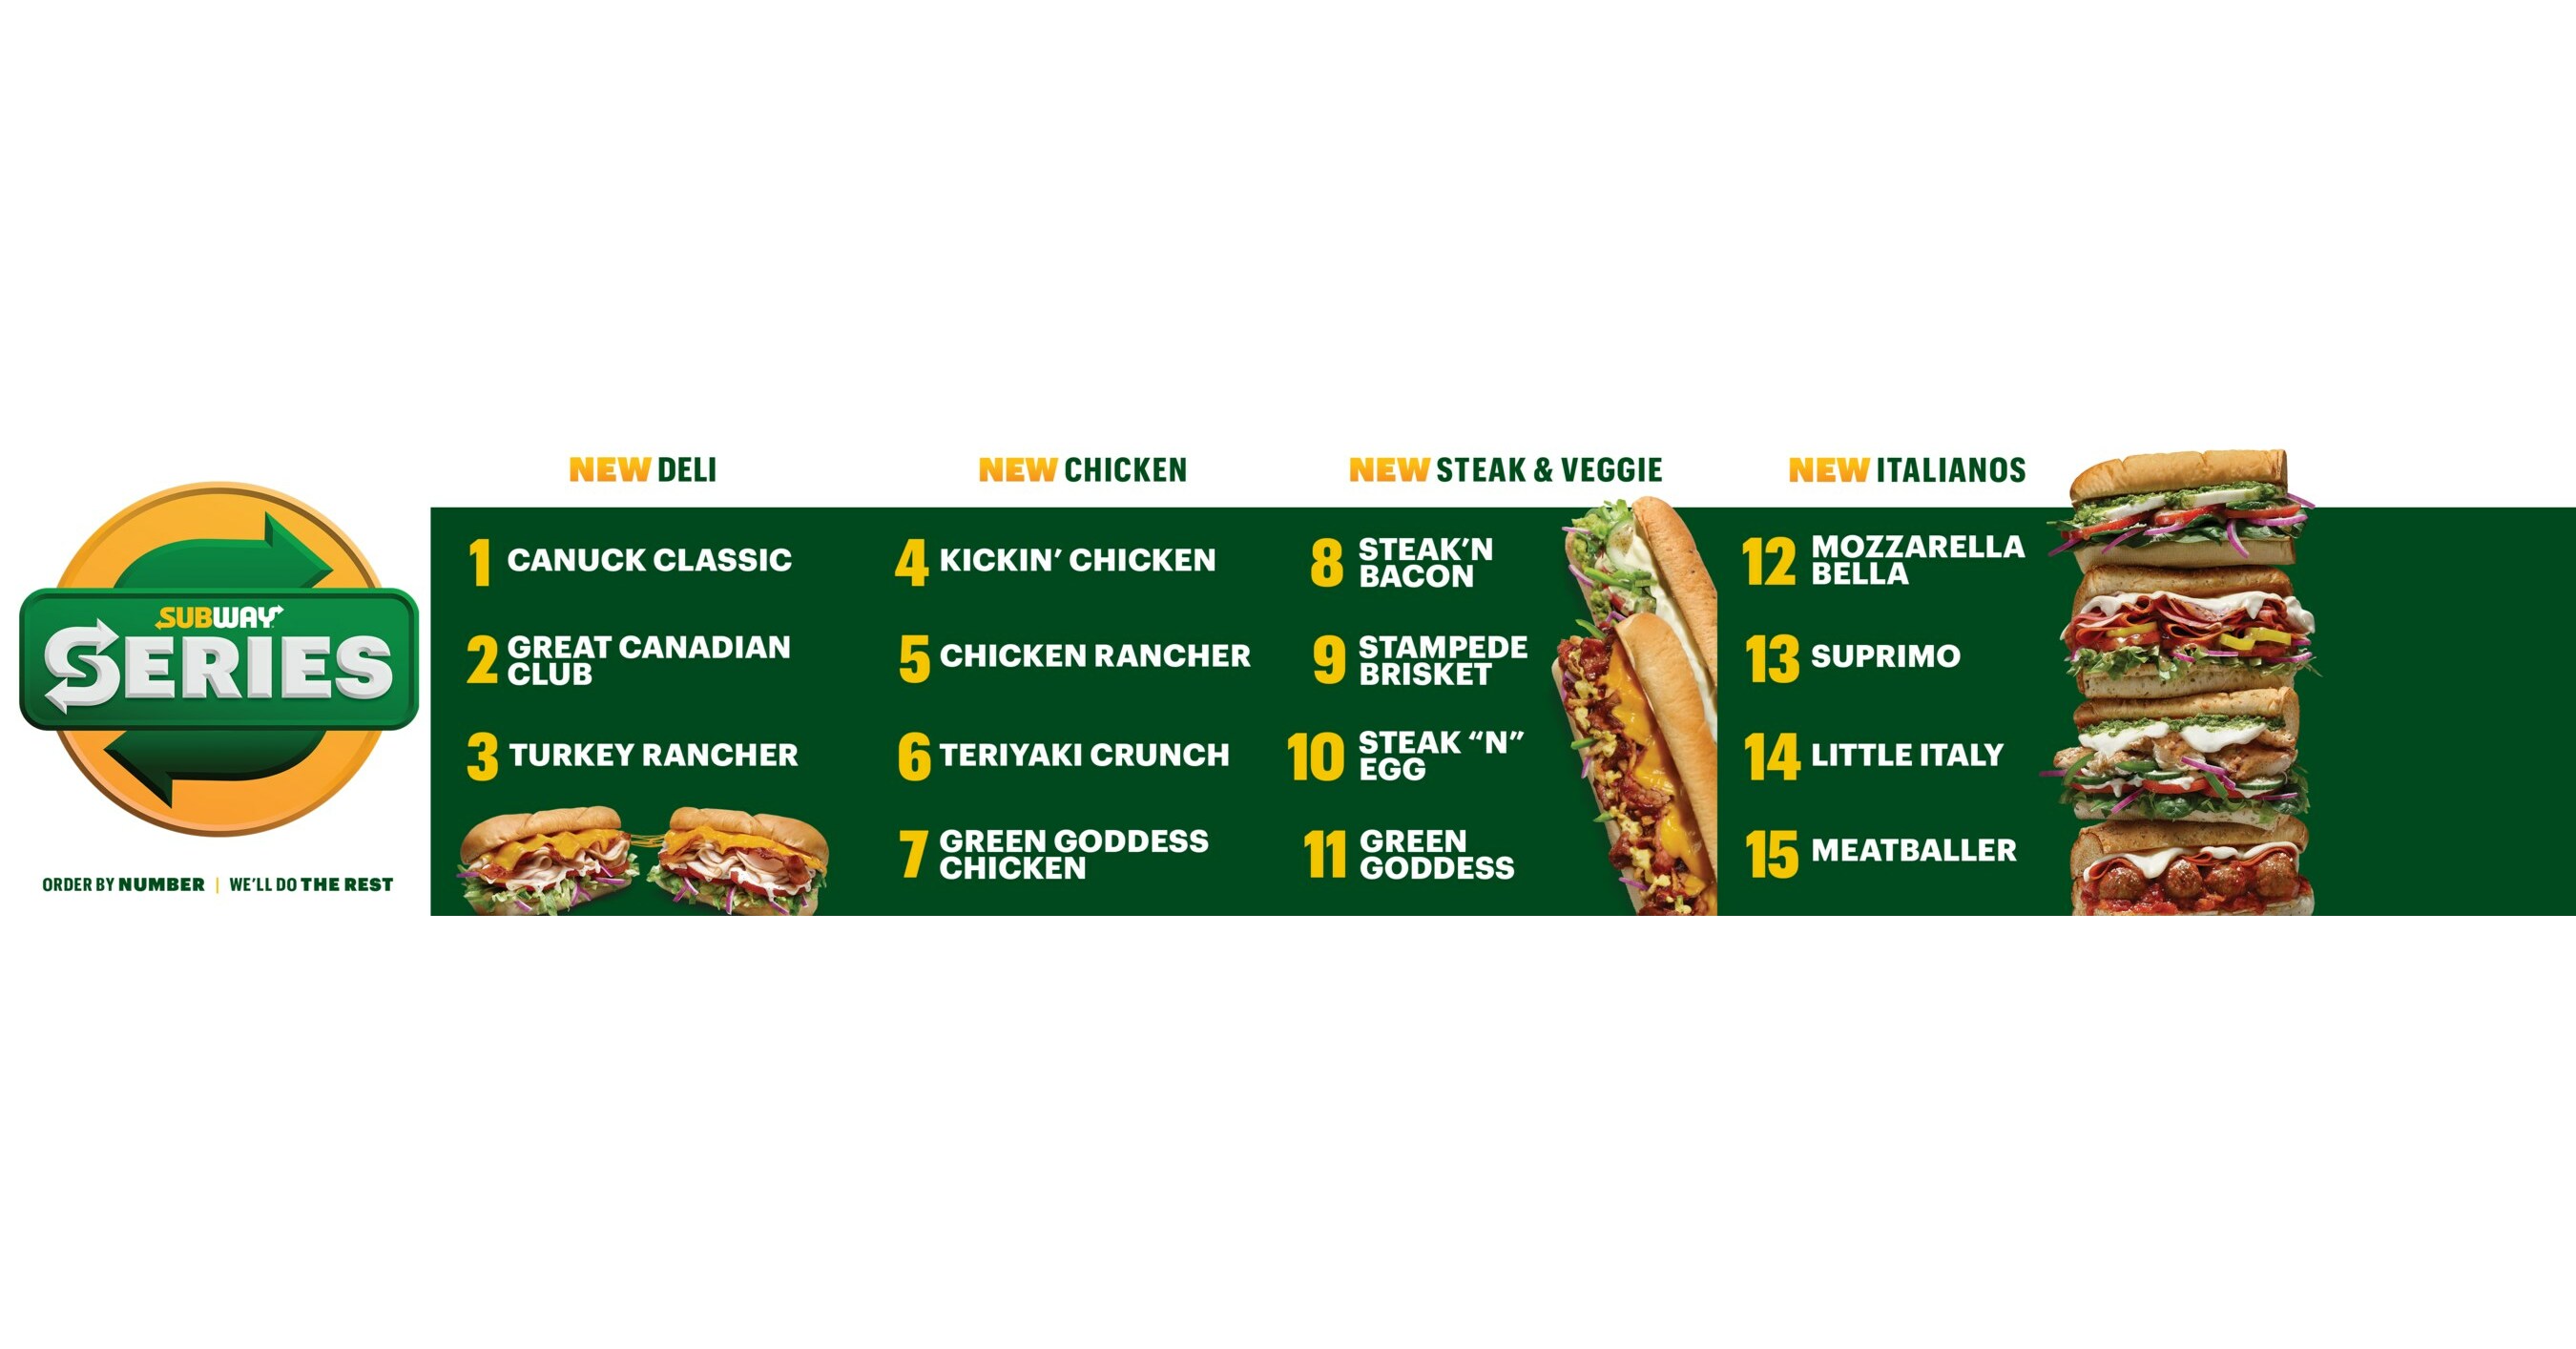 Subway® Canada Launches Biggest Menu Overhaul Ever with Subway® Series